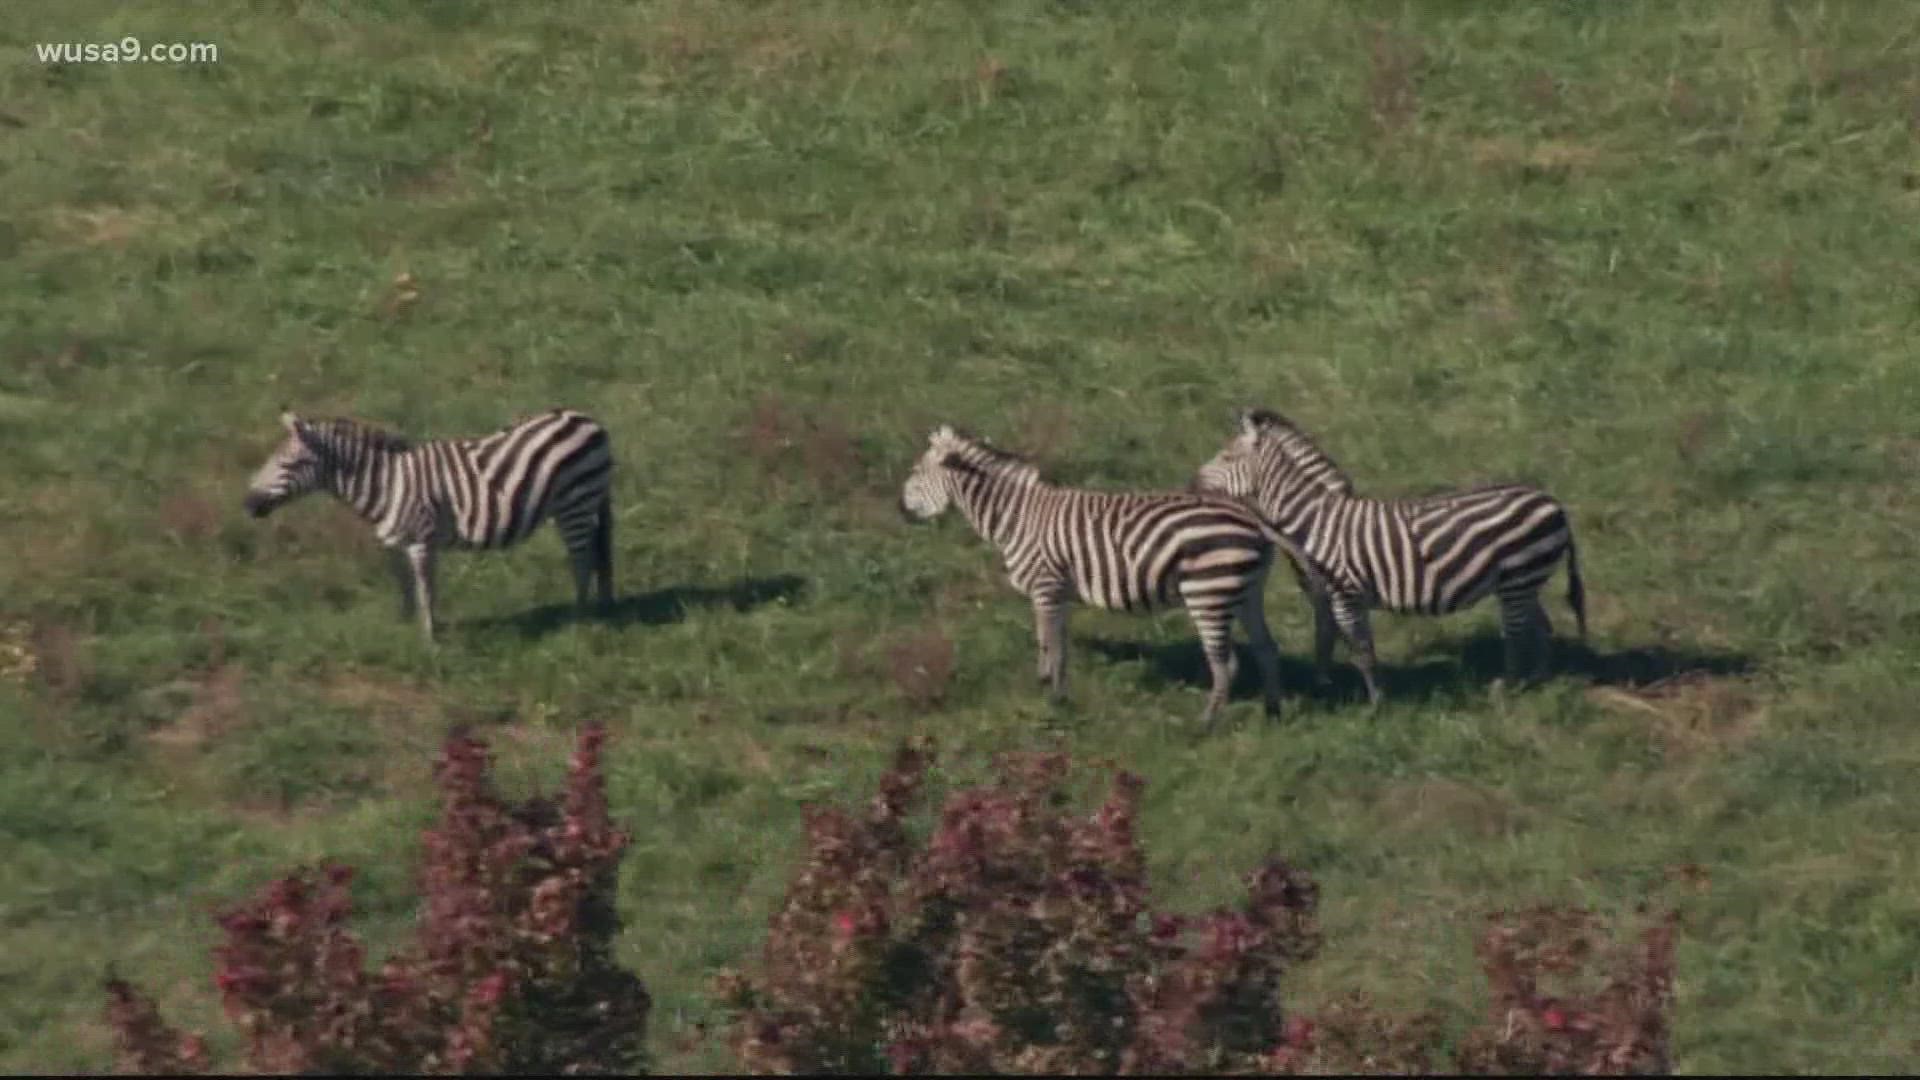 With Zebras on the loose in Maryland, people have turned to social media to ask whether it's even legal to have a pet zebra in the area.